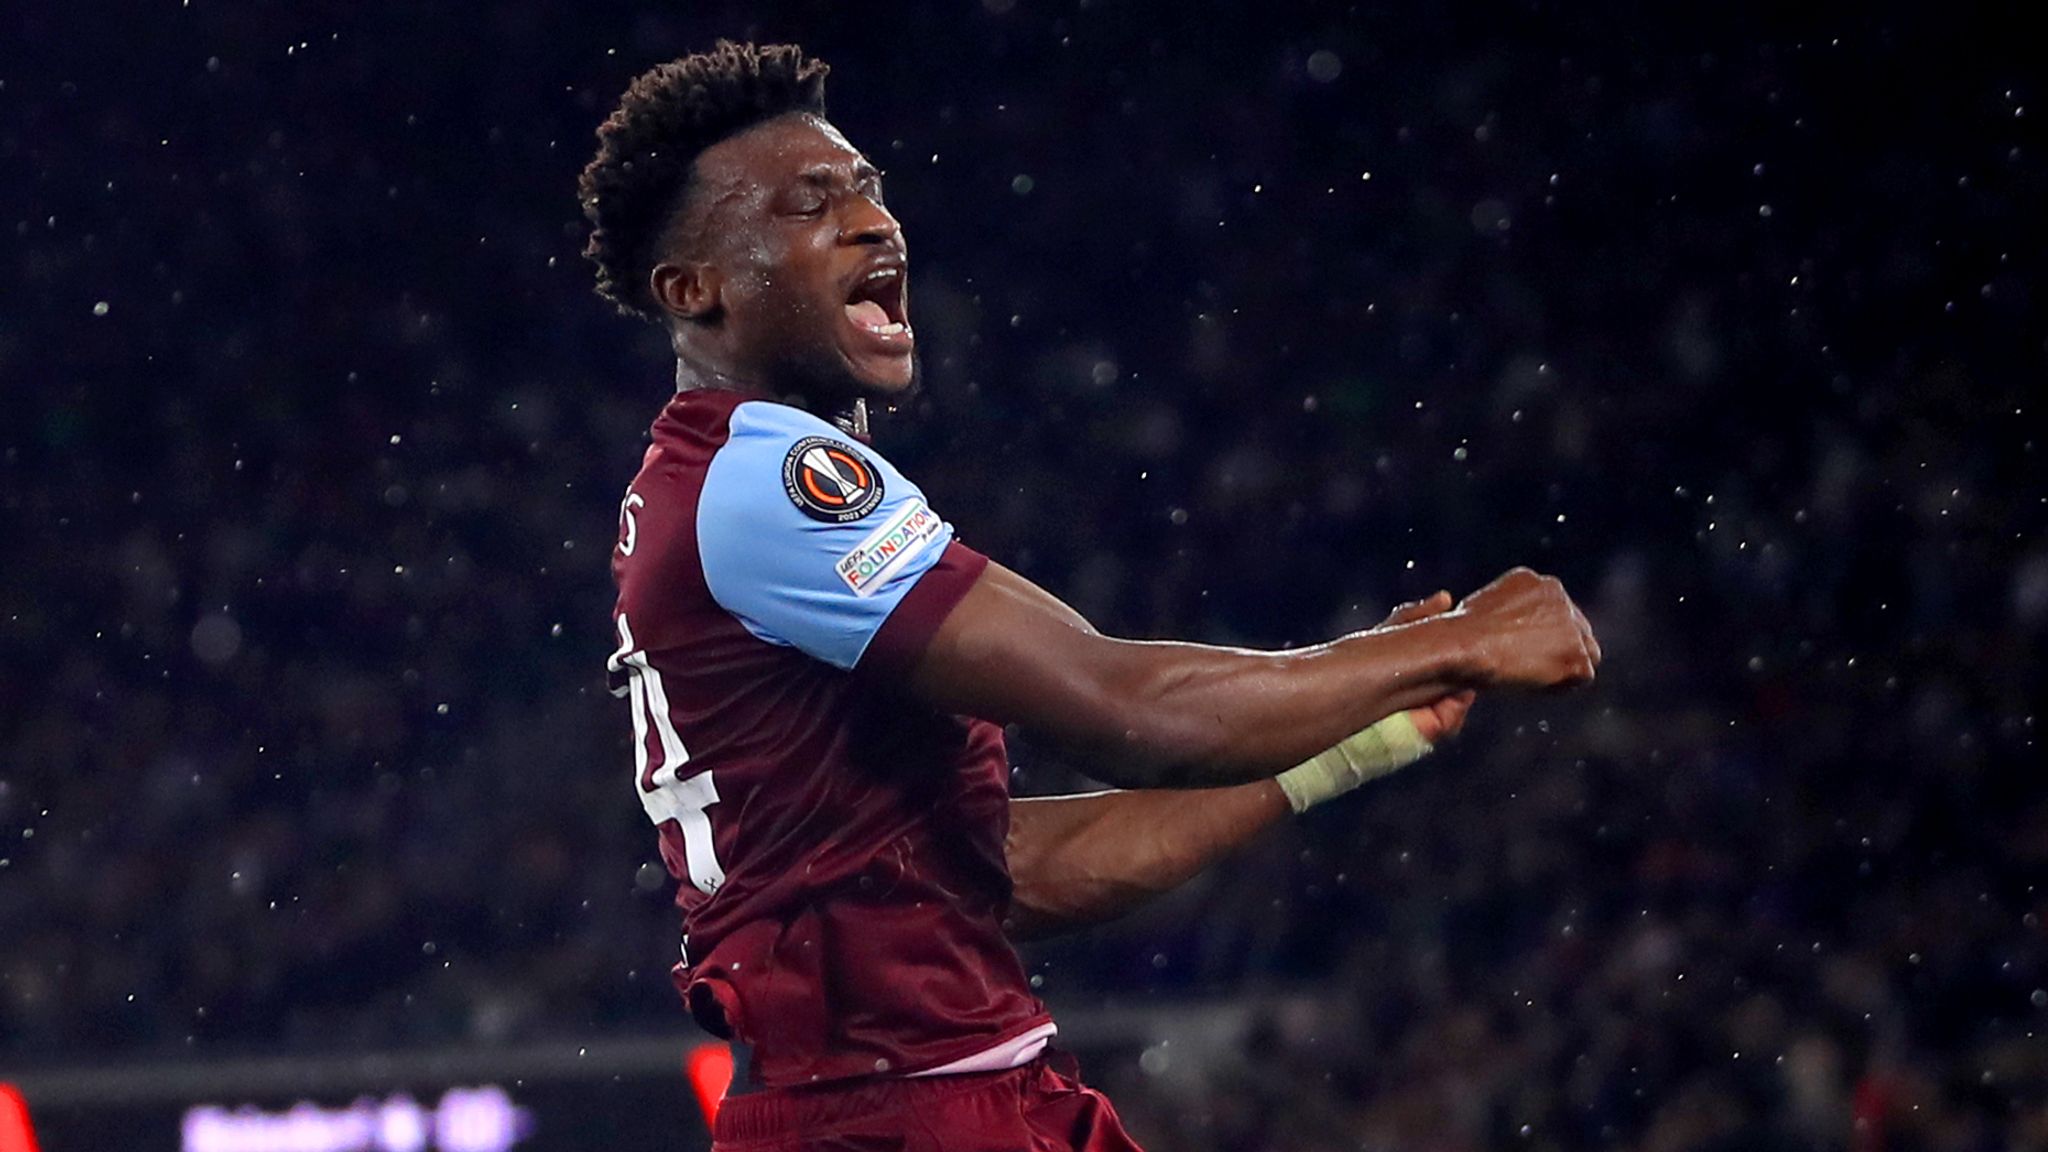  Mohammed Kudus of West Ham celebrates scoring a goal during a match.